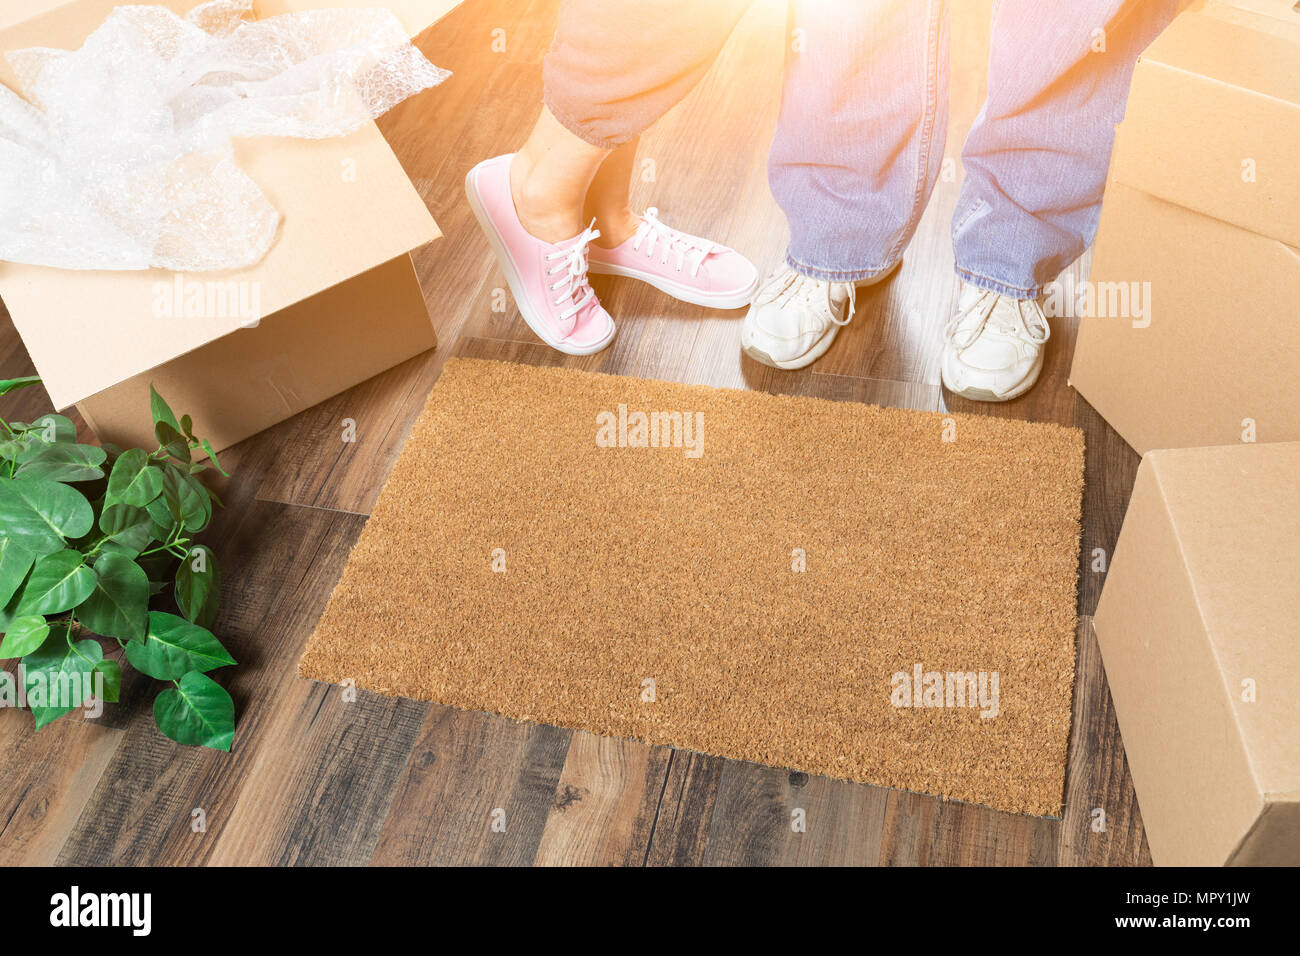 Man and Woman Standing Near Home Sweet Home Welcome Mat, Moving Boxes and Plant. Stock Photo